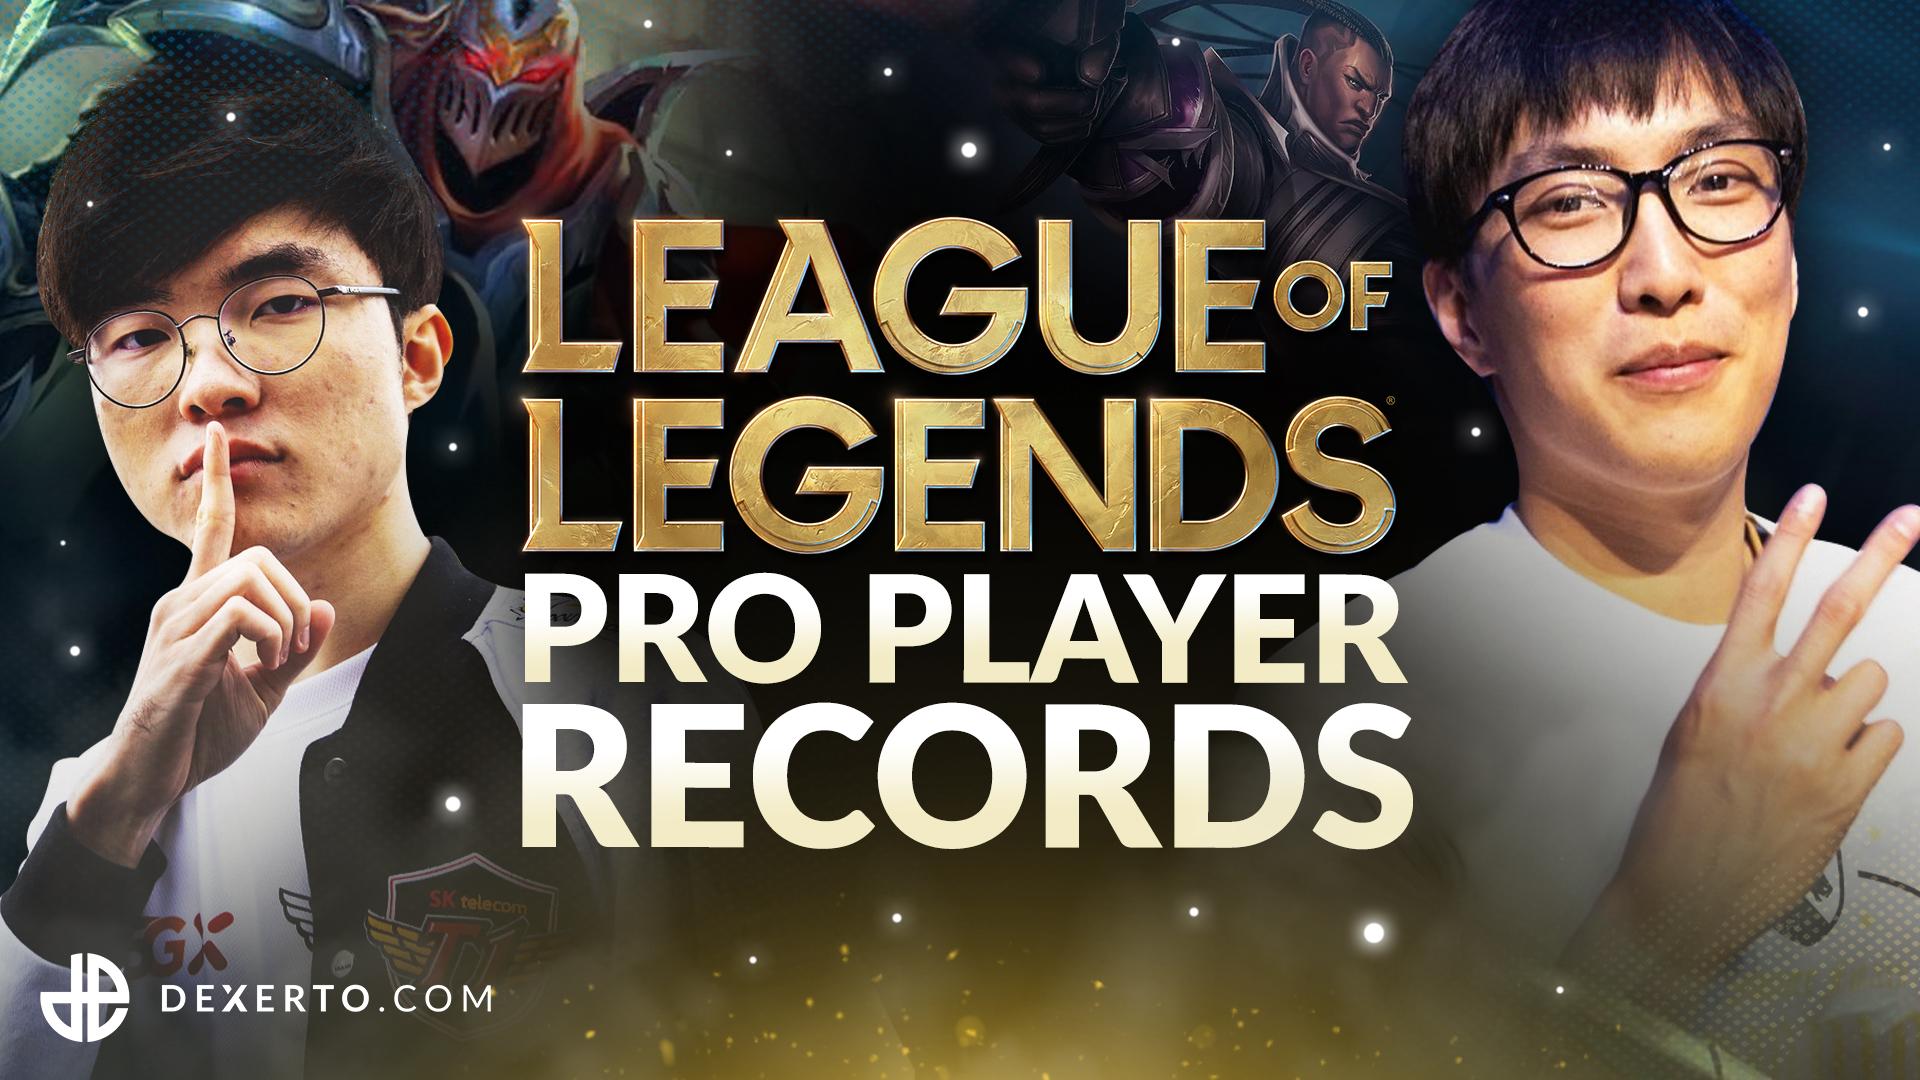 How to Record League of Legends